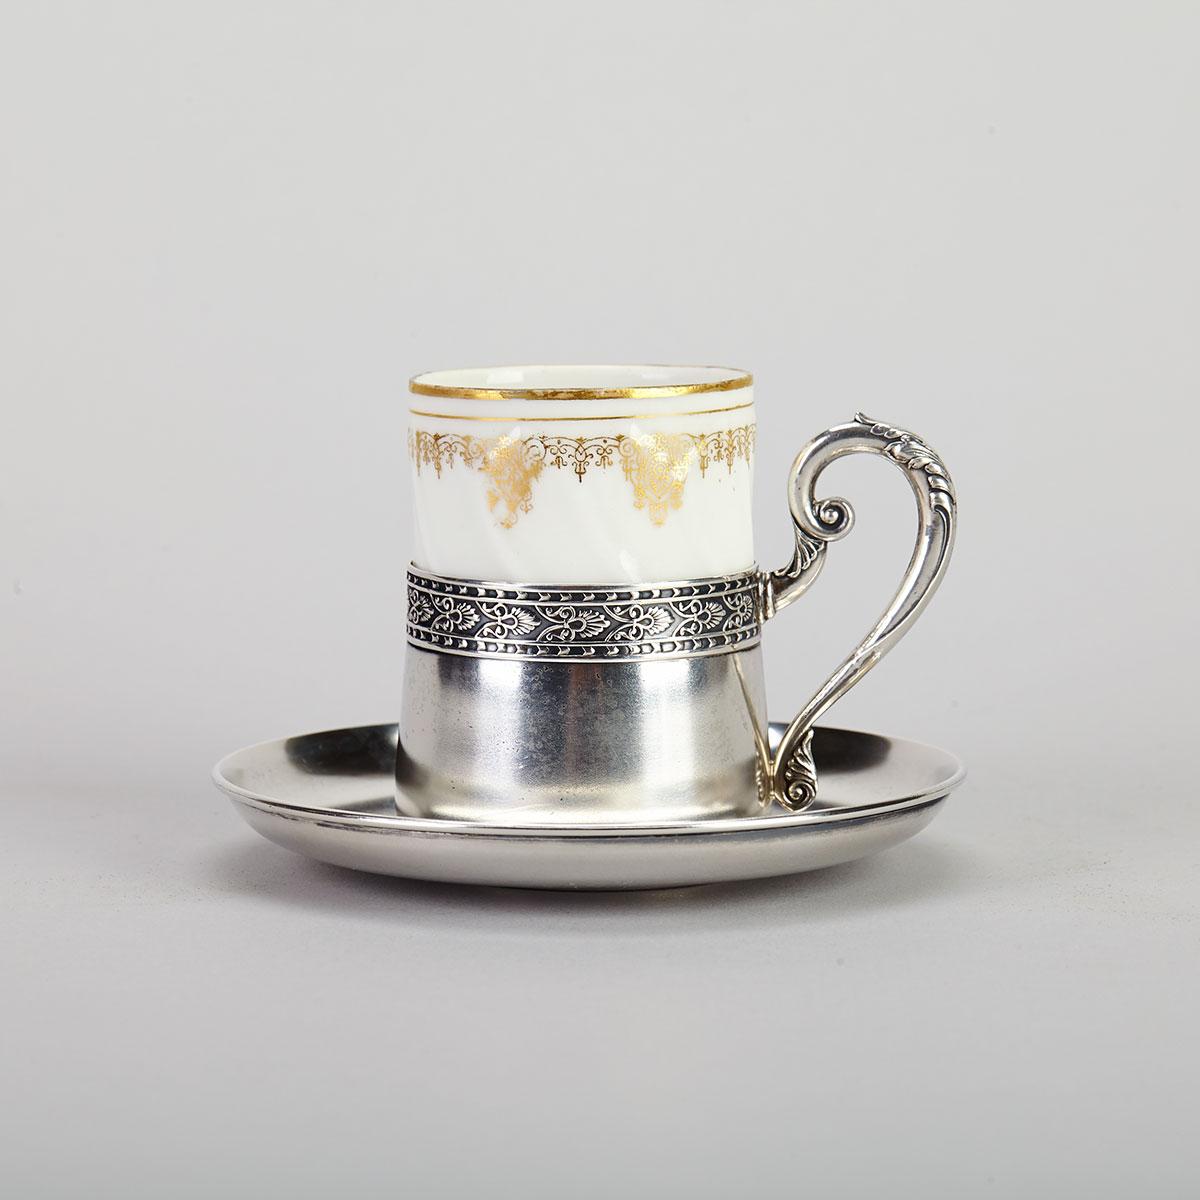 Russian Silver Mounted Kuznetsov Cup and Saucer, Moscow, 1908-17